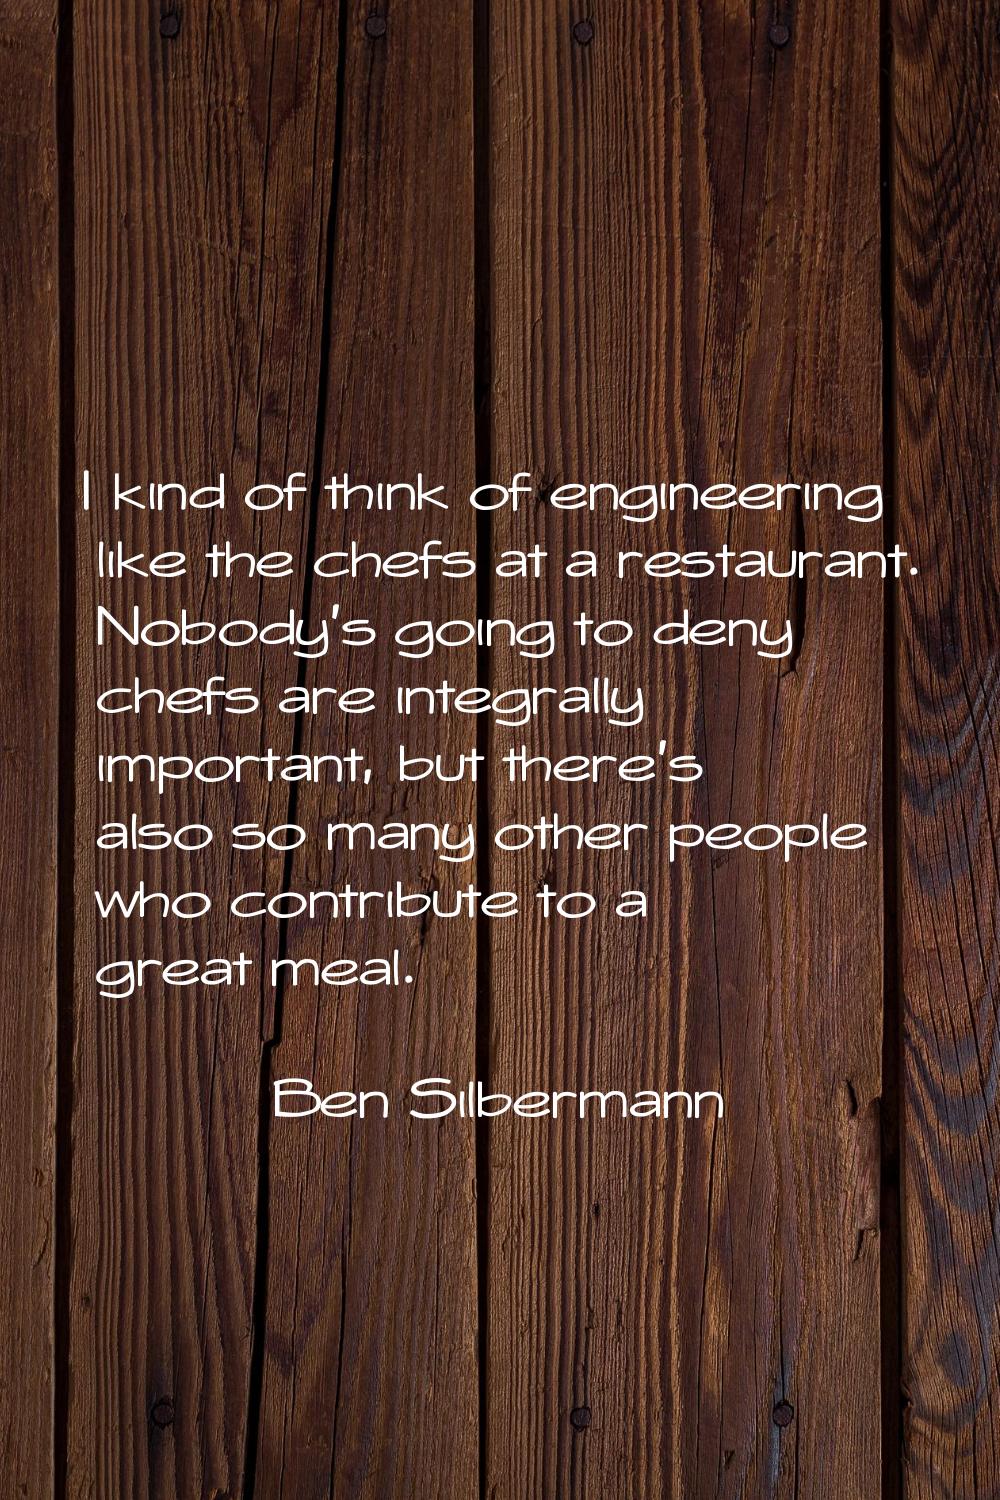 I kind of think of engineering like the chefs at a restaurant. Nobody's going to deny chefs are int